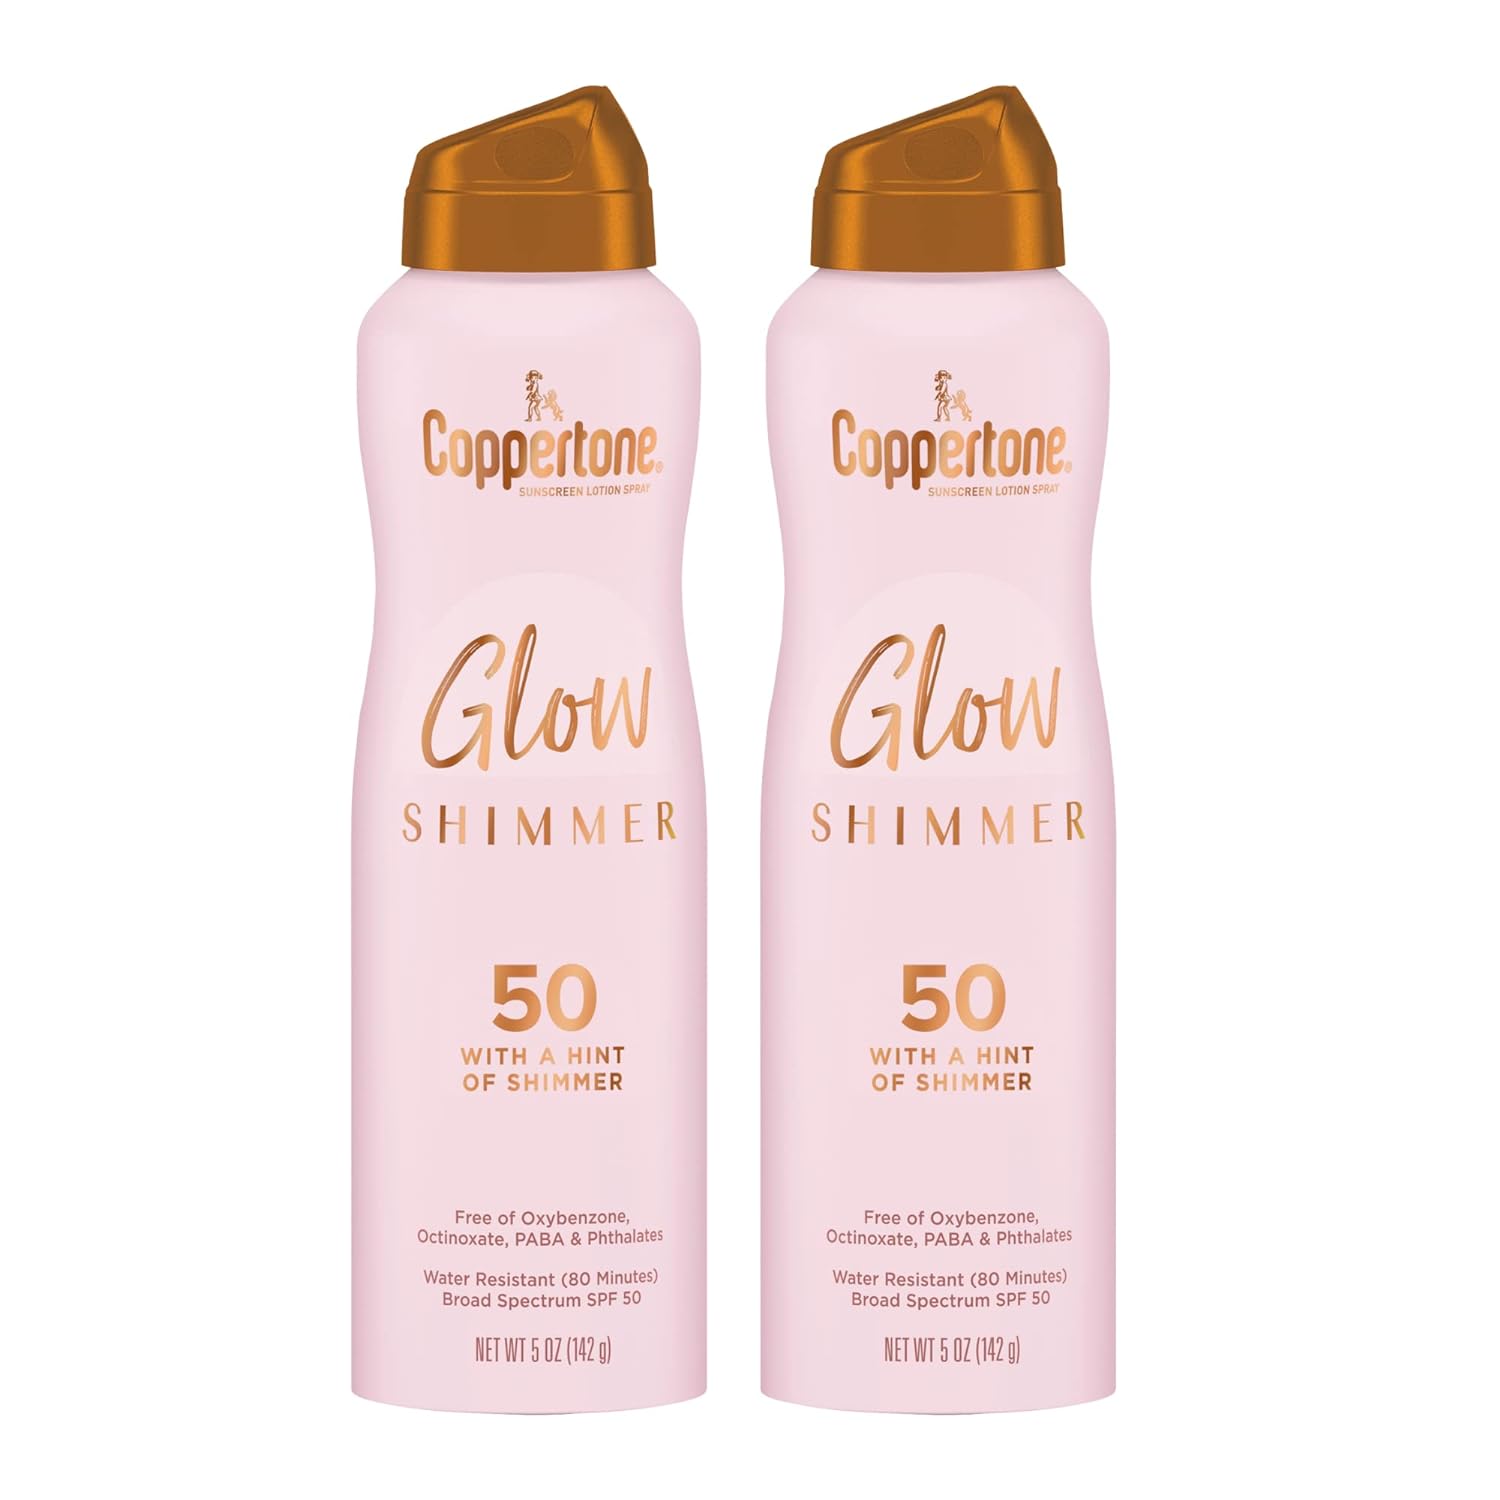 Coppertone Glow with Shimmer Sunscreen Spray SPF 50, Water Resistant Spray Sunscreen, Broad Spectrum SPF 50 Sunscreen Pack, 5 Oz Spray, Pack of 2